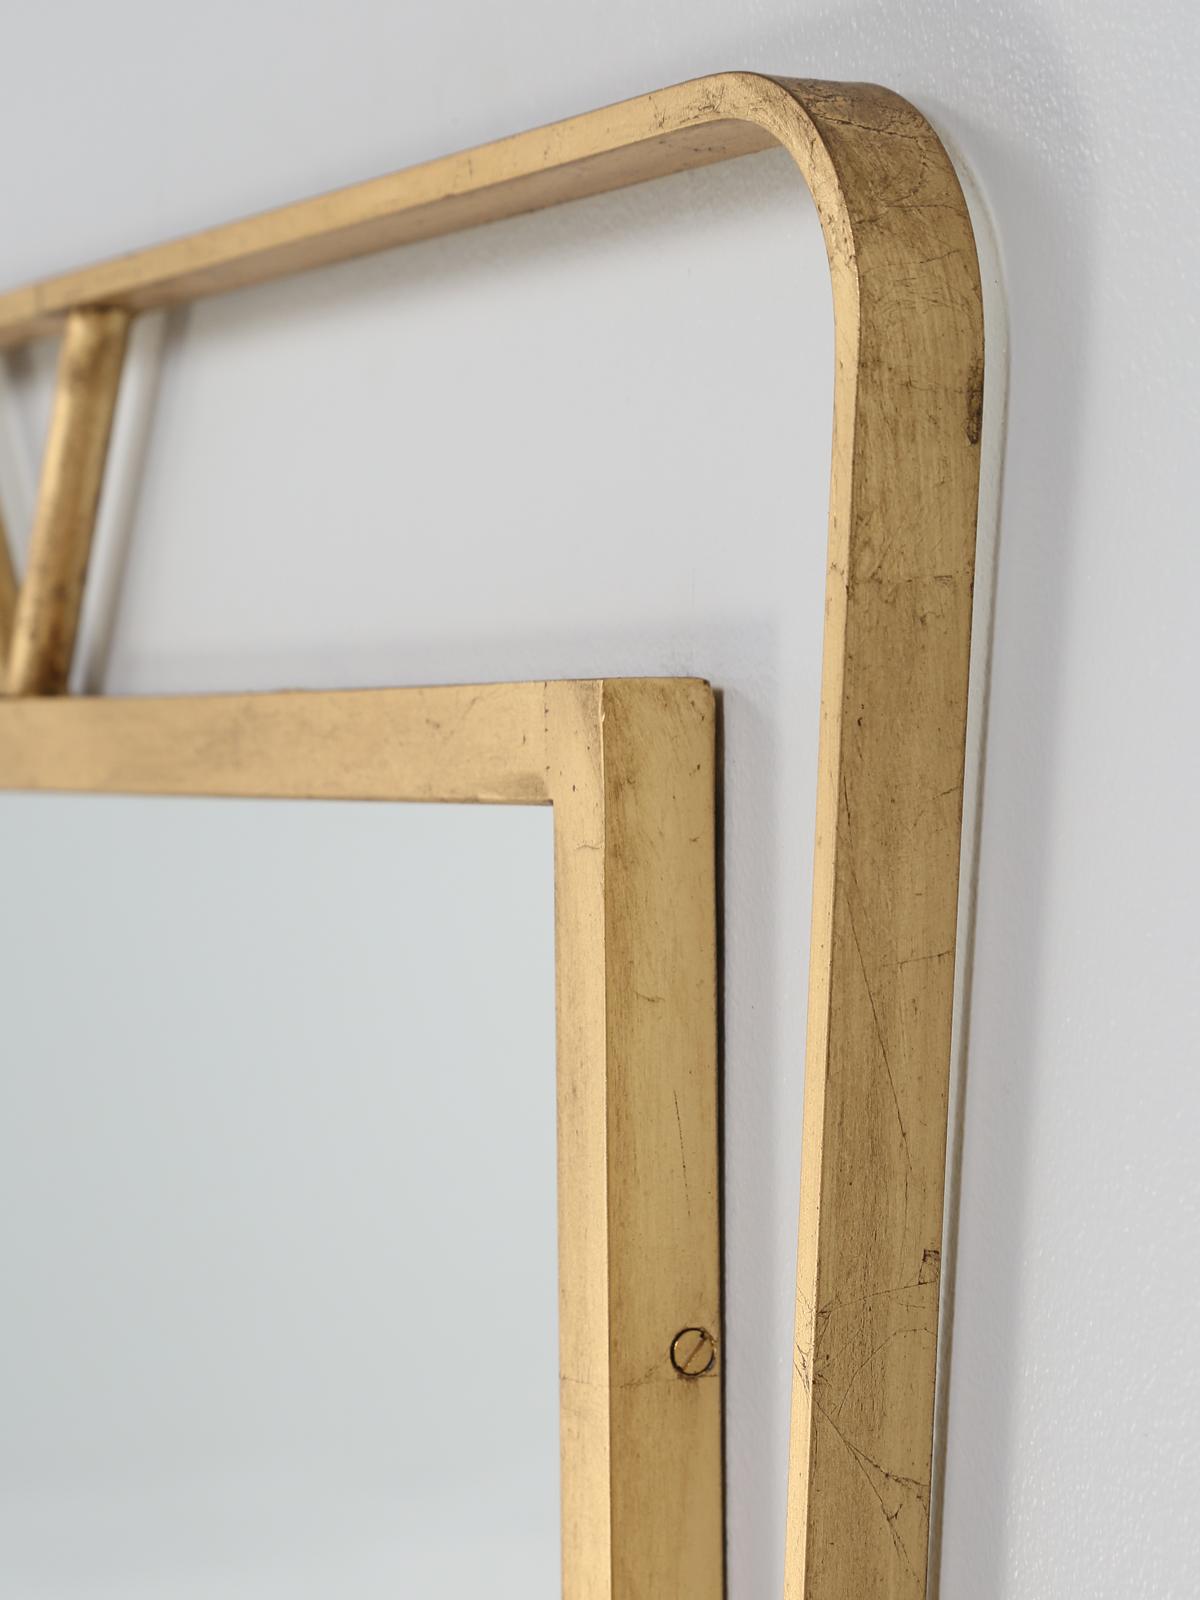 Hand-Crafted Custom Hand-Made by Old Plank Gilded Wall Mirror Available Any Dimension, Finish For Sale